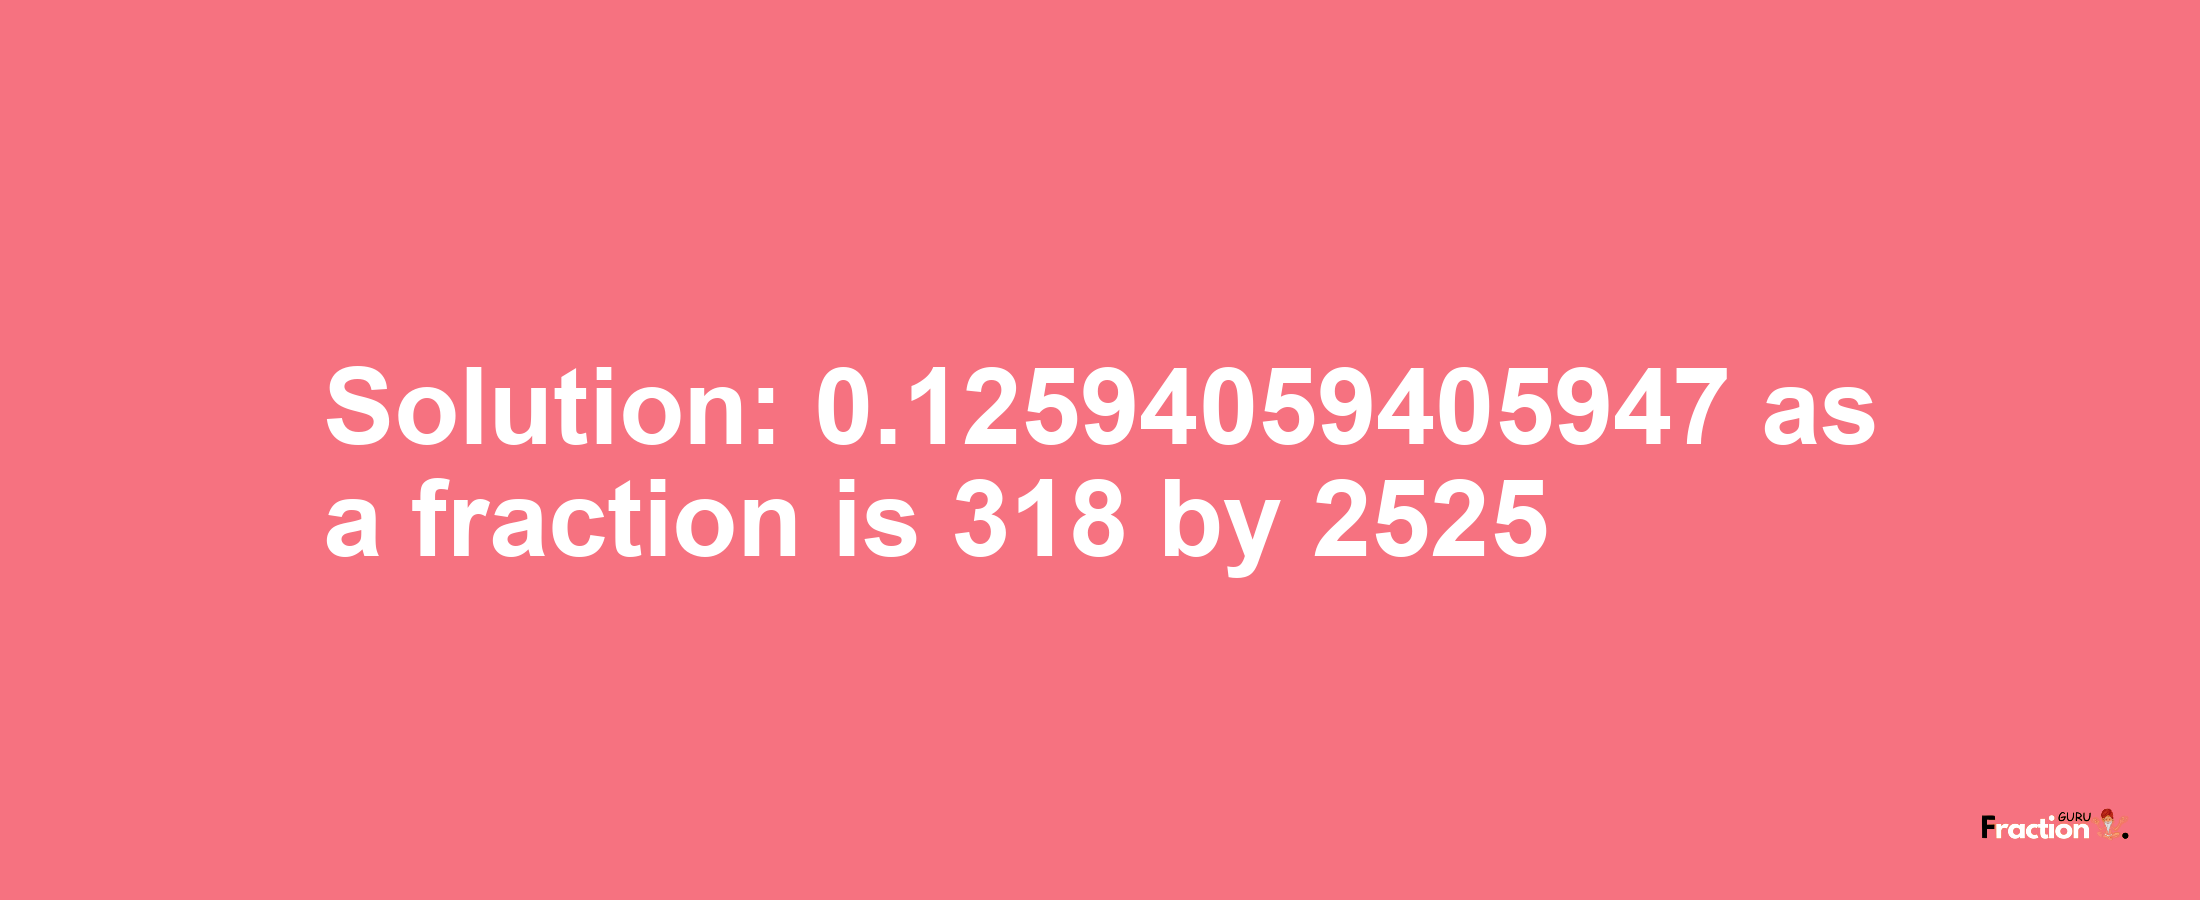 Solution:0.12594059405947 as a fraction is 318/2525